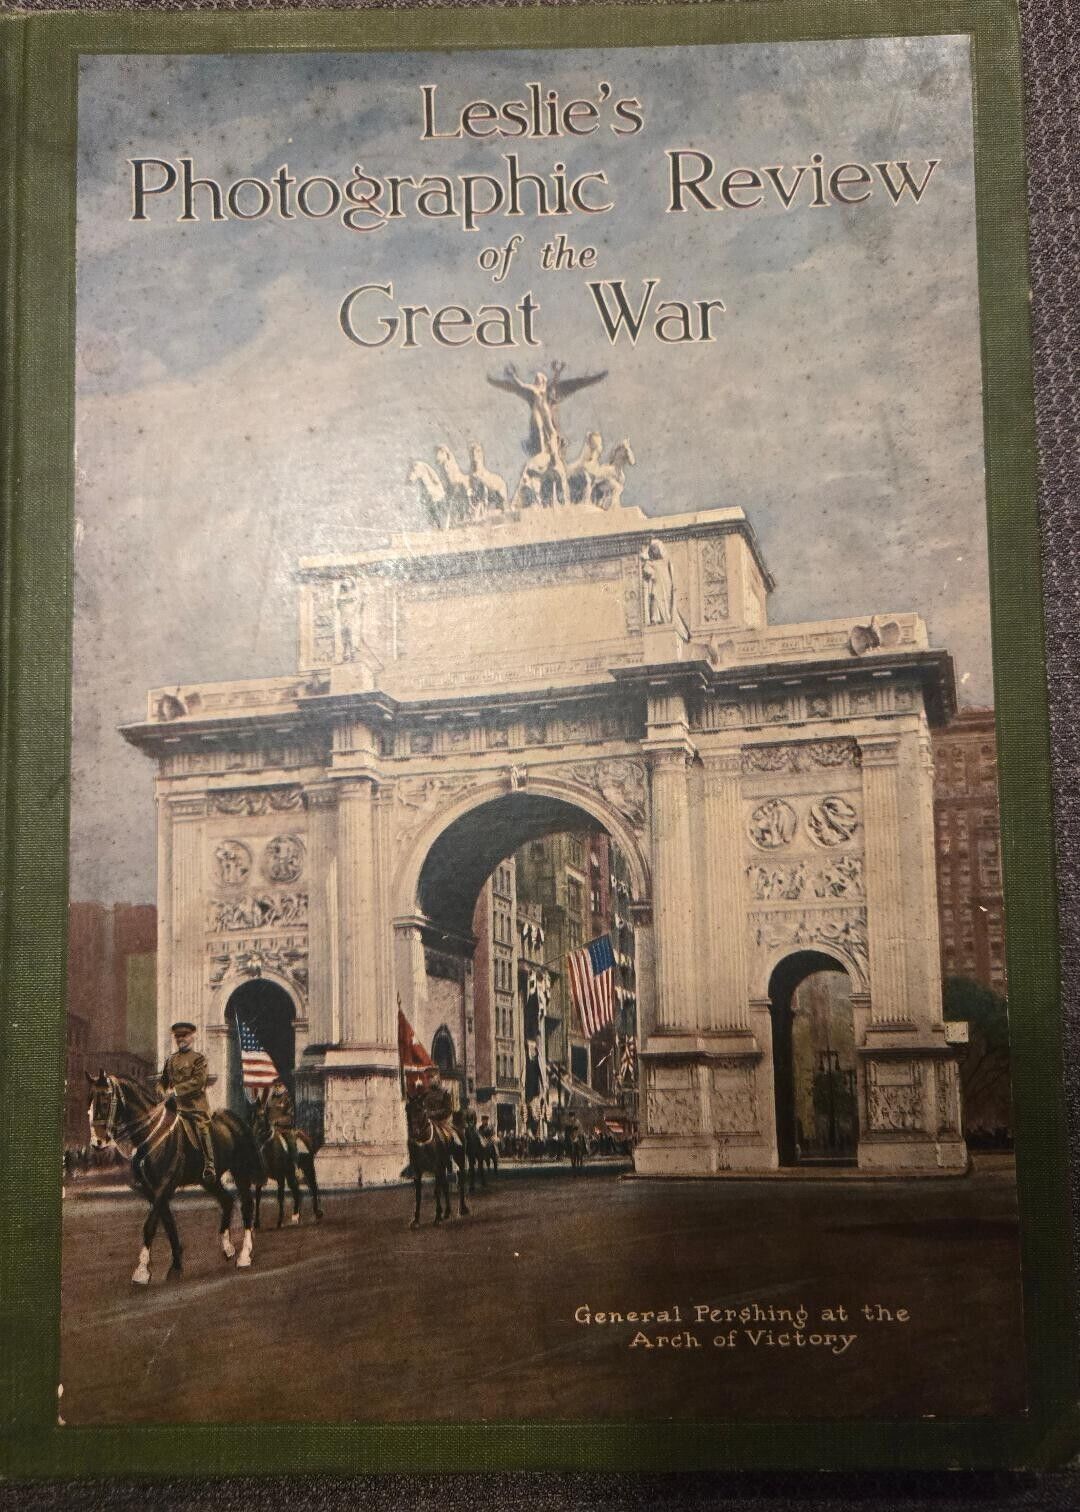 Leslie's Photographic Review of the Great War - 1919